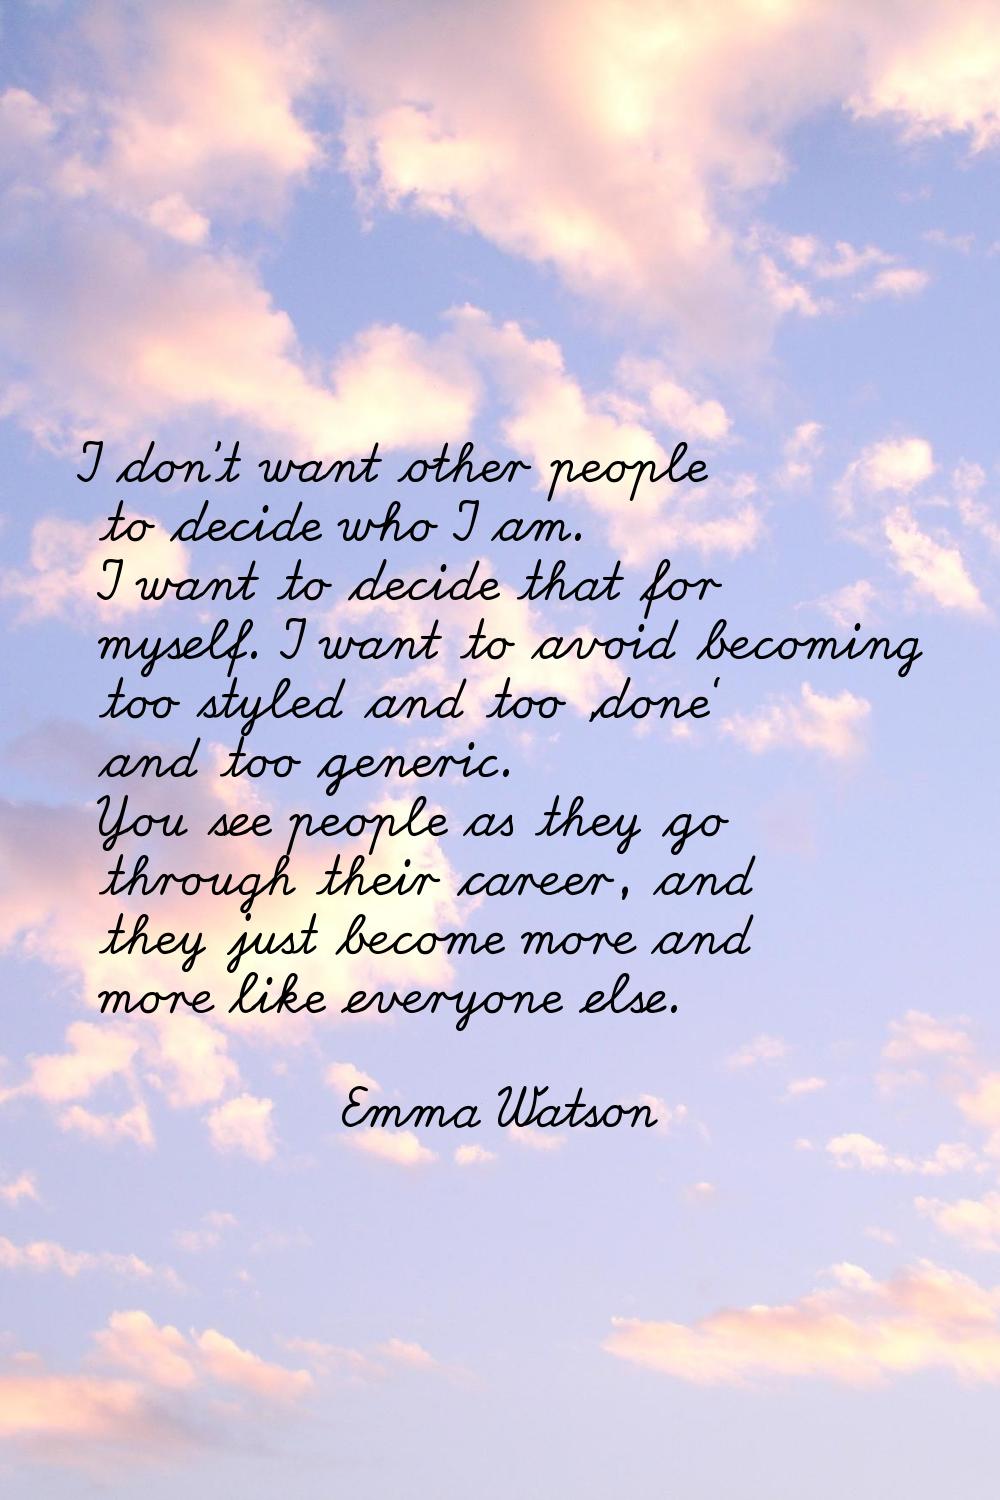 I don't want other people to decide who I am. I want to decide that for myself. I want to avoid bec